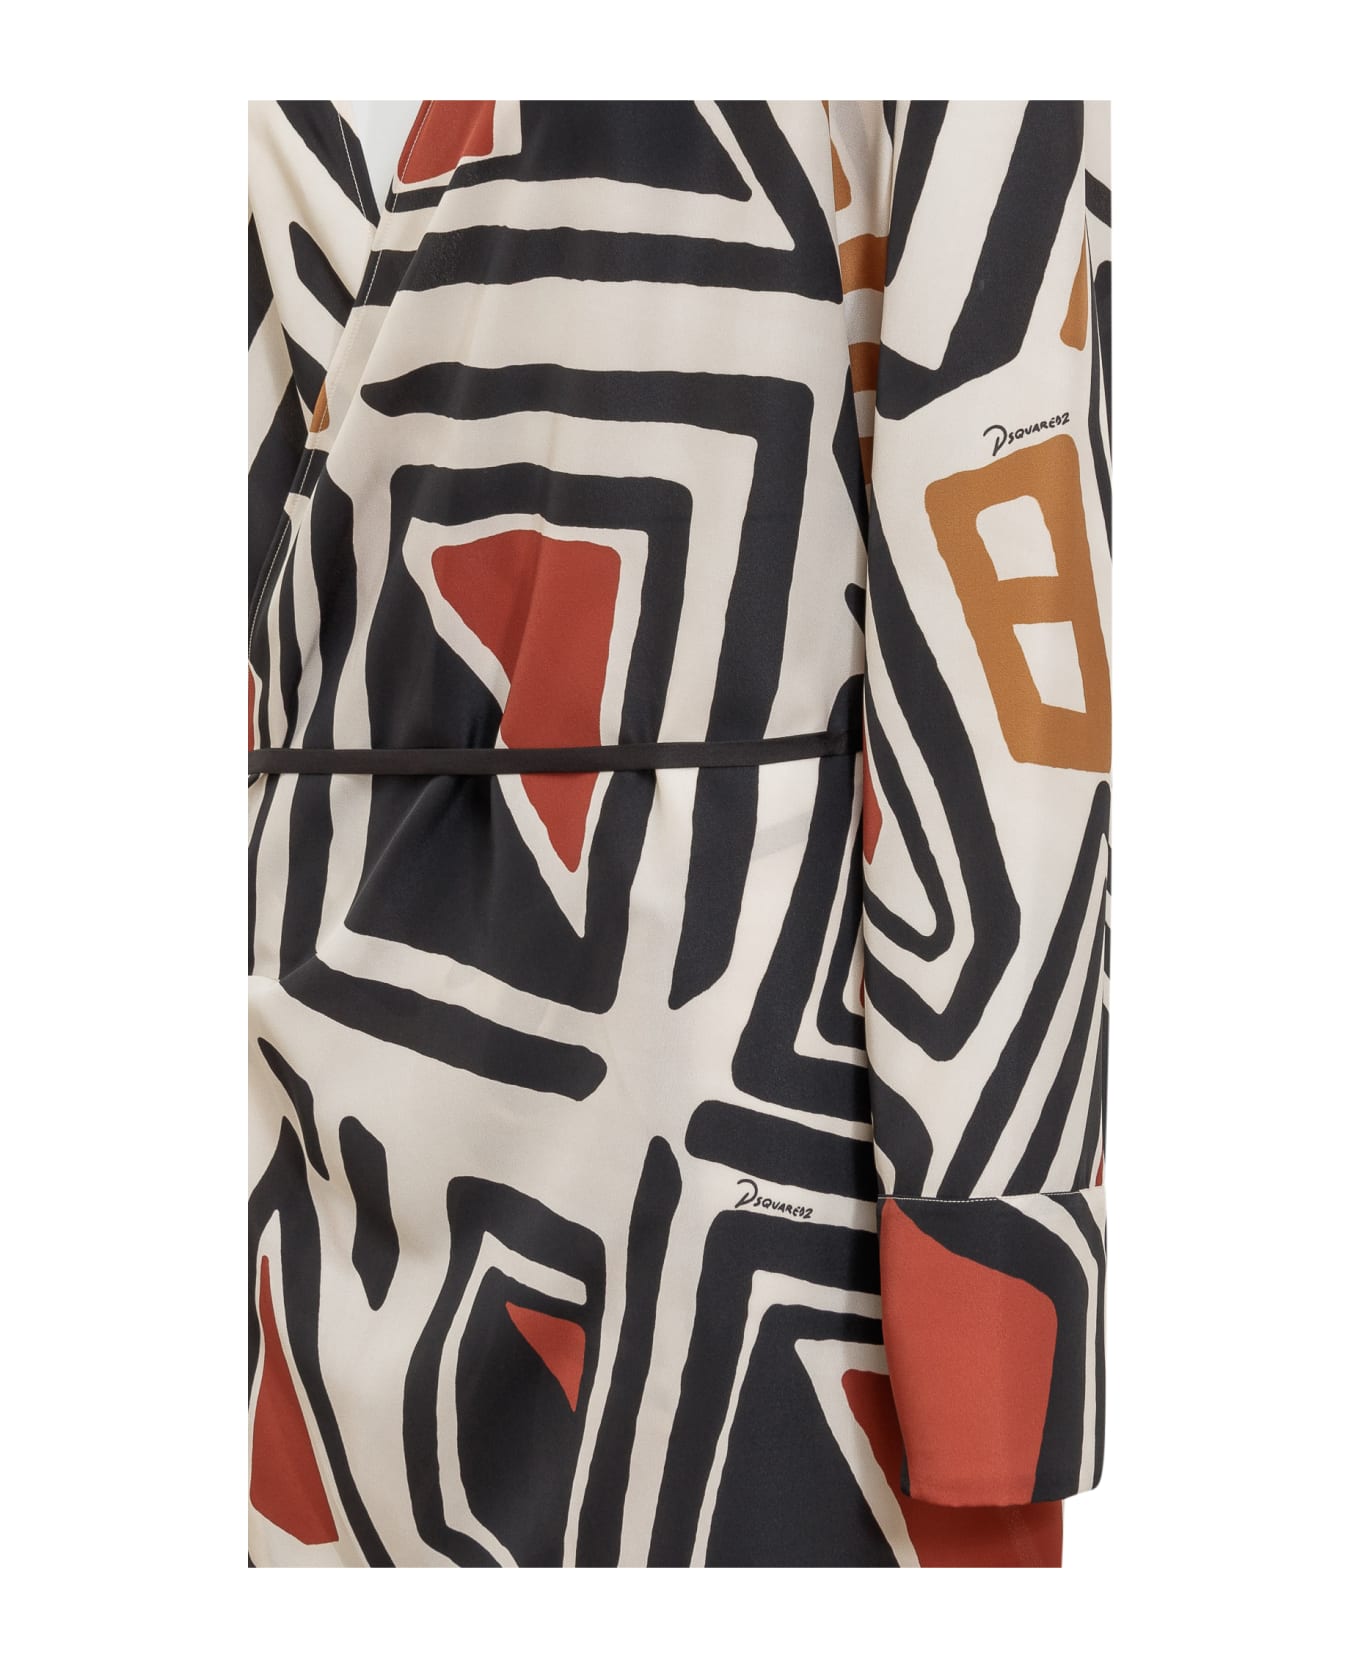 Dsquared2 Dress With Print - MULTICOLOR